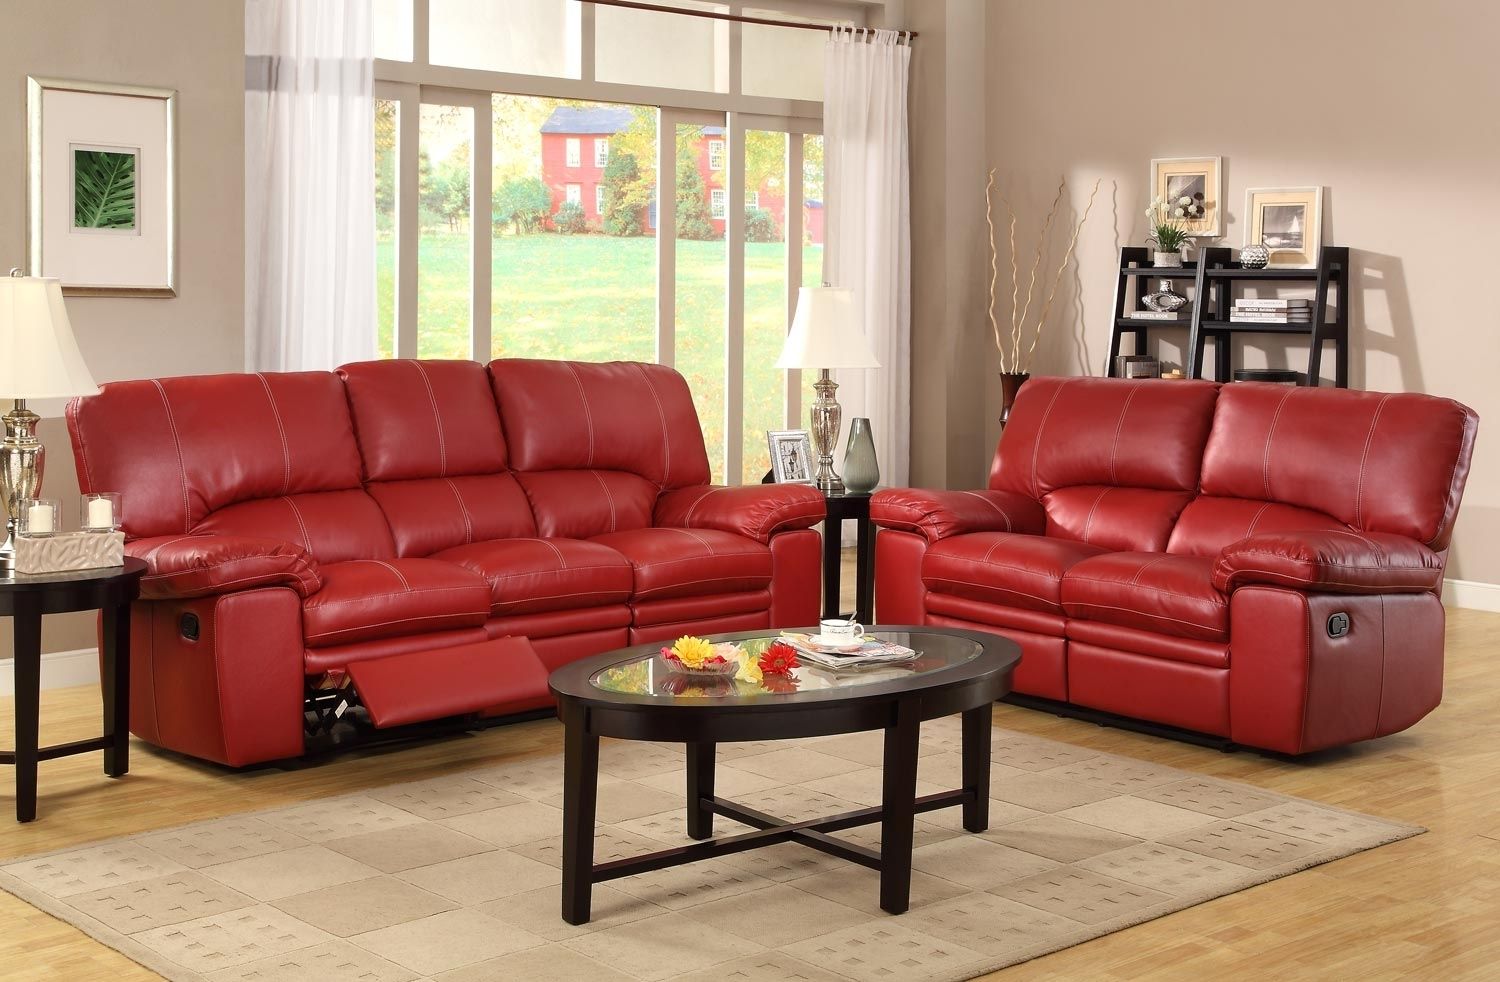 15 Best Collection of Red Leather Couches for Living Room